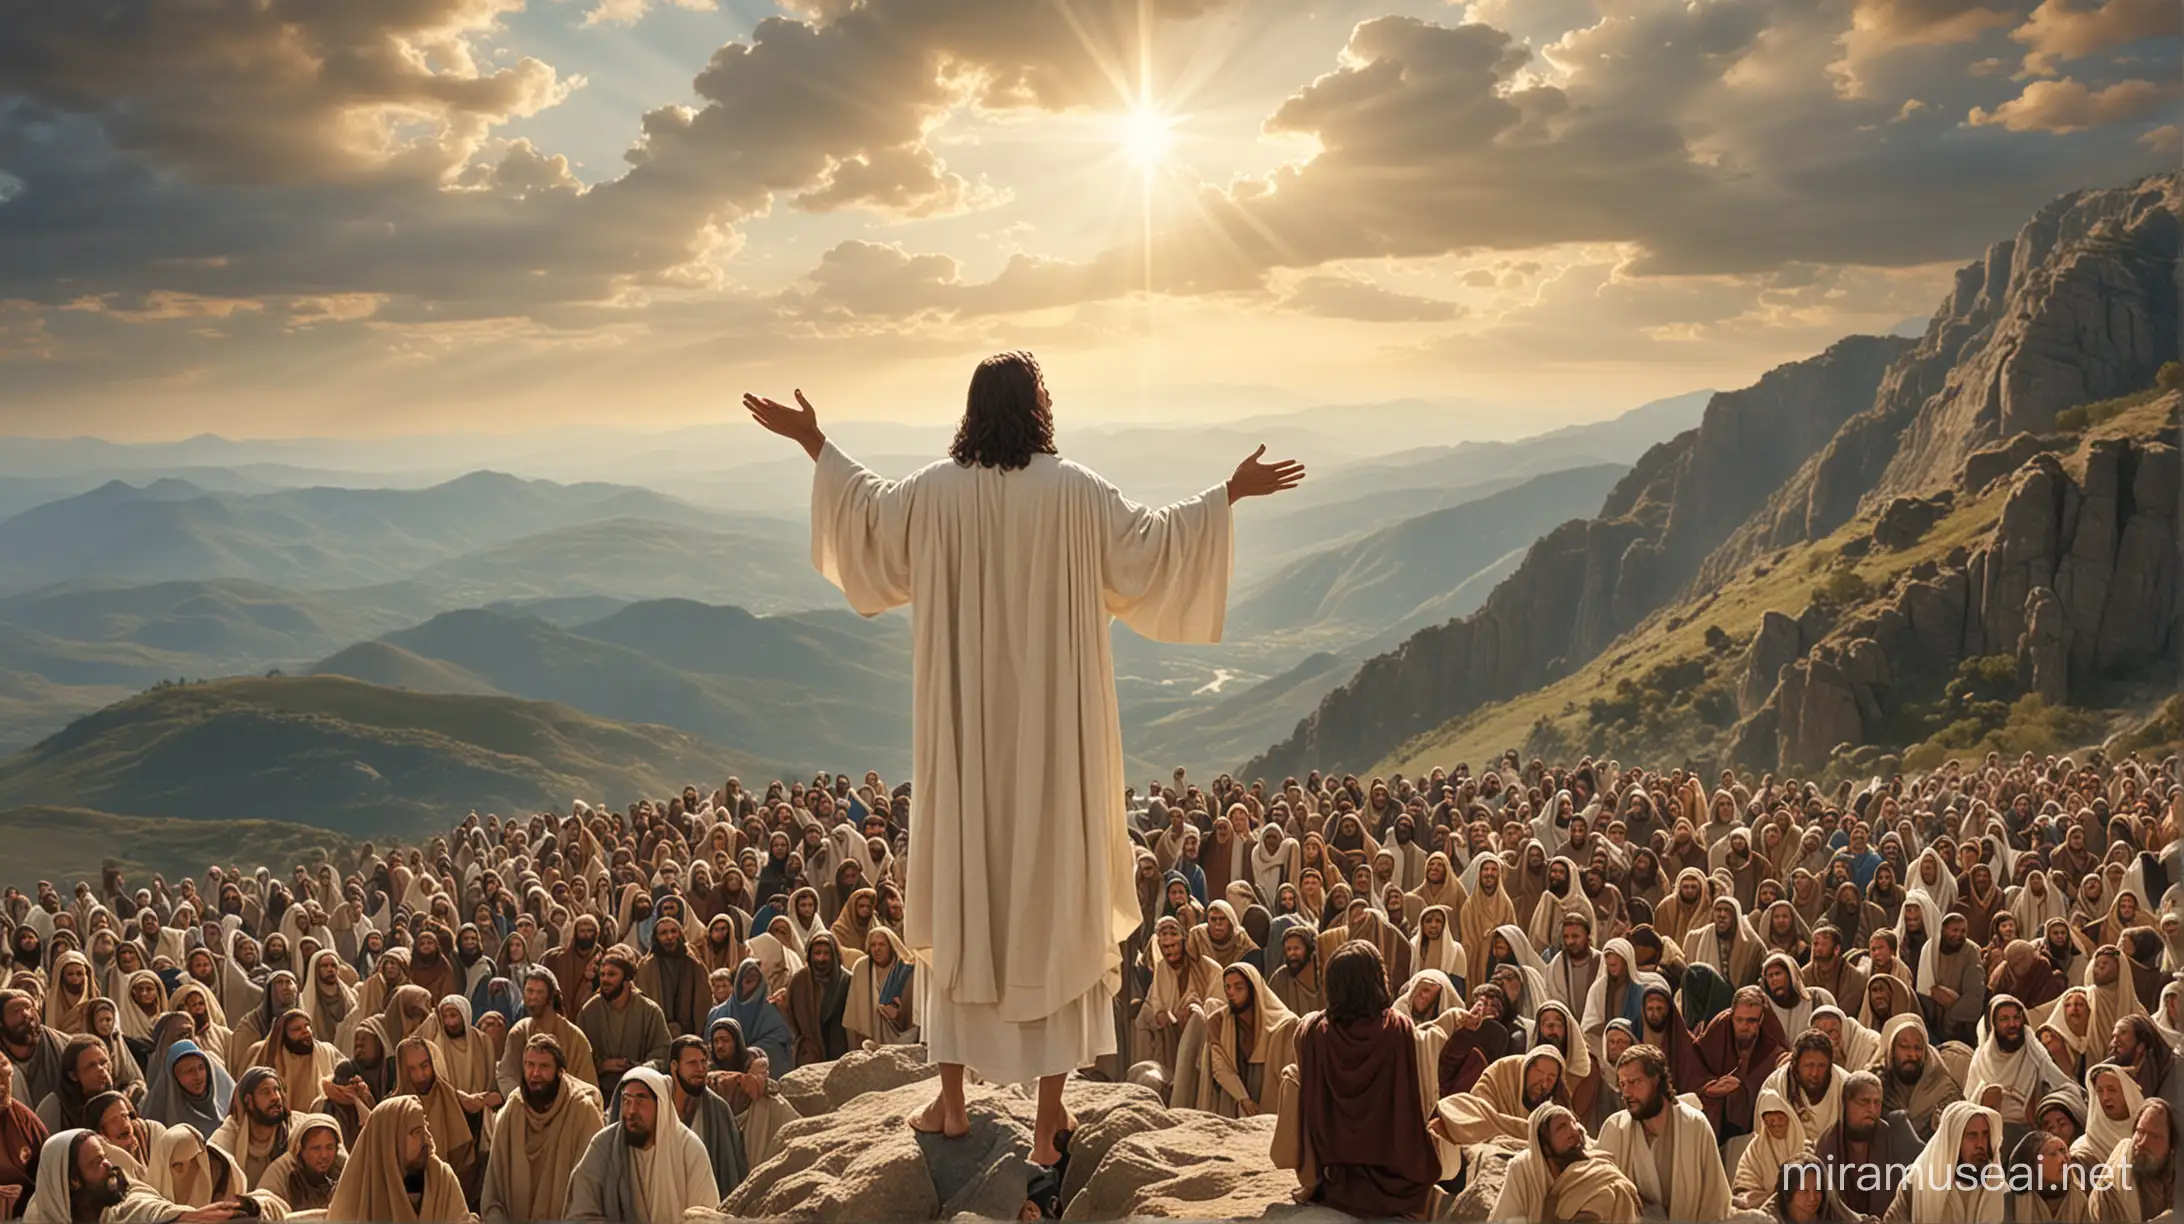 Jesus, preaching to many people on the mountain.